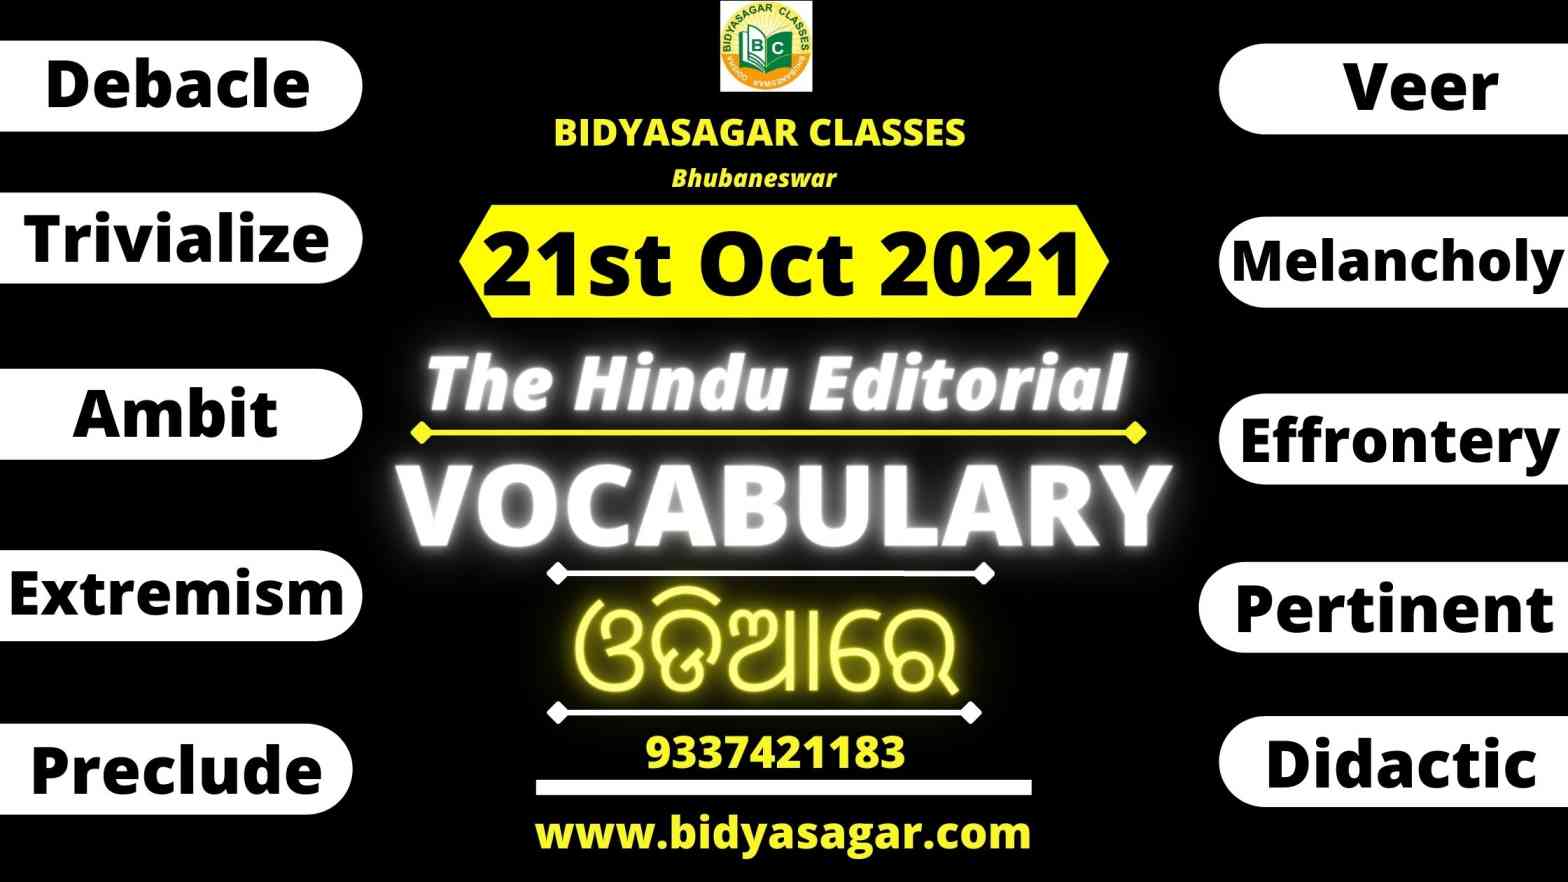 The Hindu Editorial Vocabulary of 21st October 2021